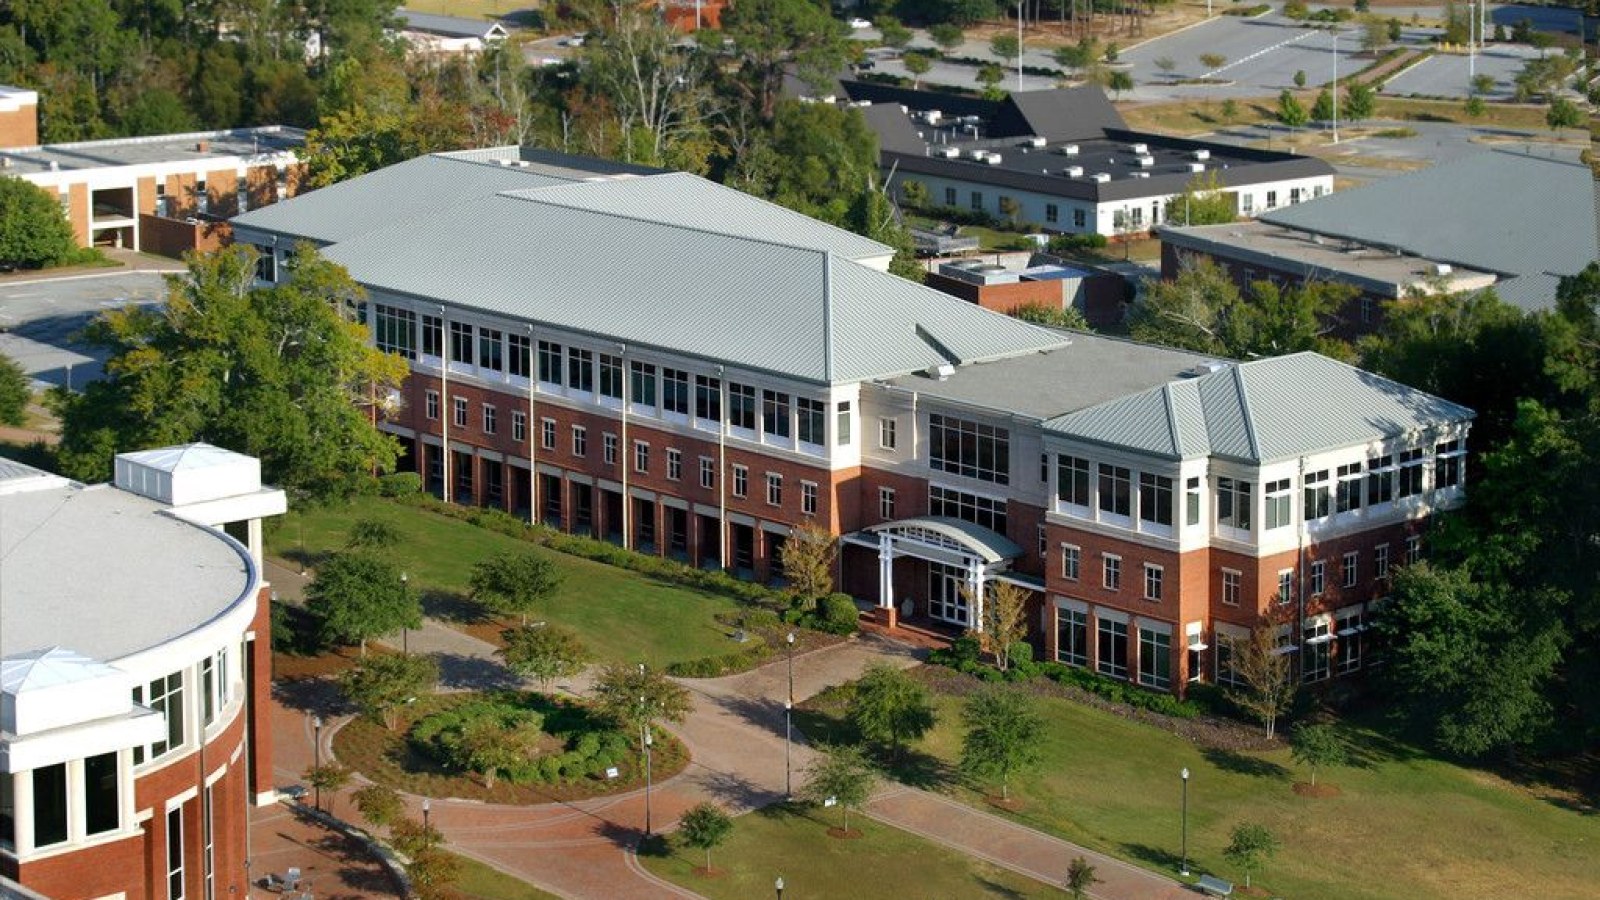 Southern university college